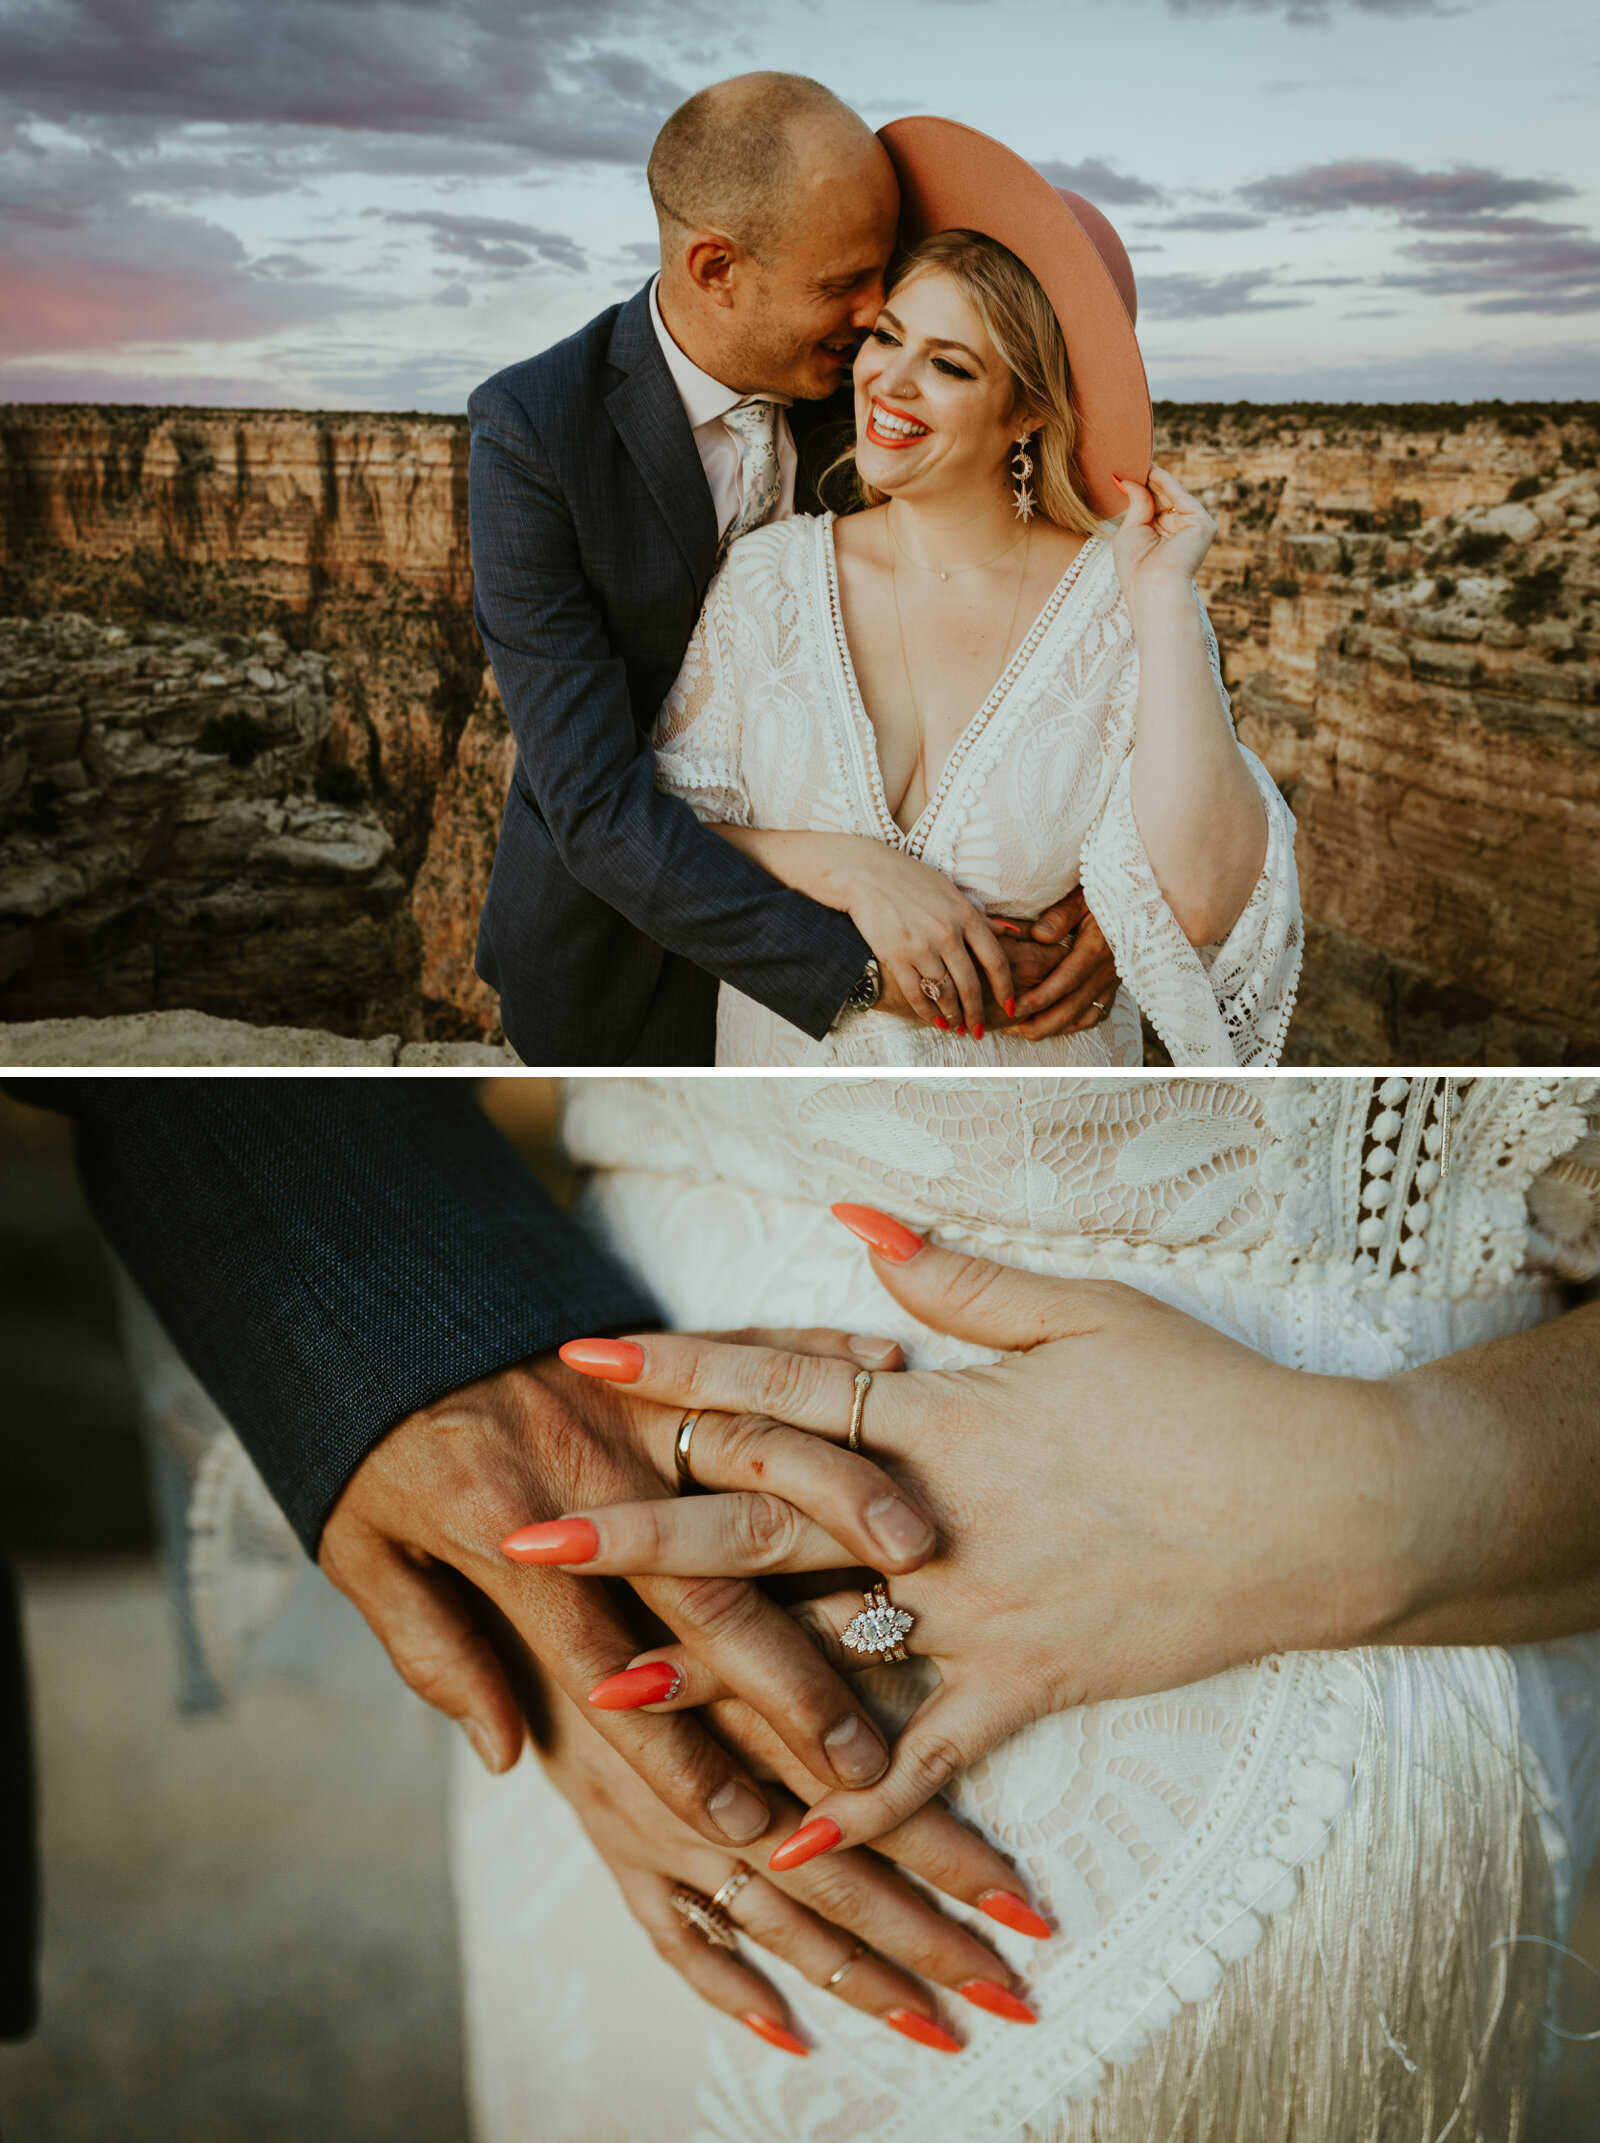 moran point grand canyon national park arizona elopement photography bibiluxe dress with fringe tassels boho bride inspiration boho wedding style inspo lack of color hat bridal hat bride and groom posing ideas romantic bride and groom photo ideas.jpg